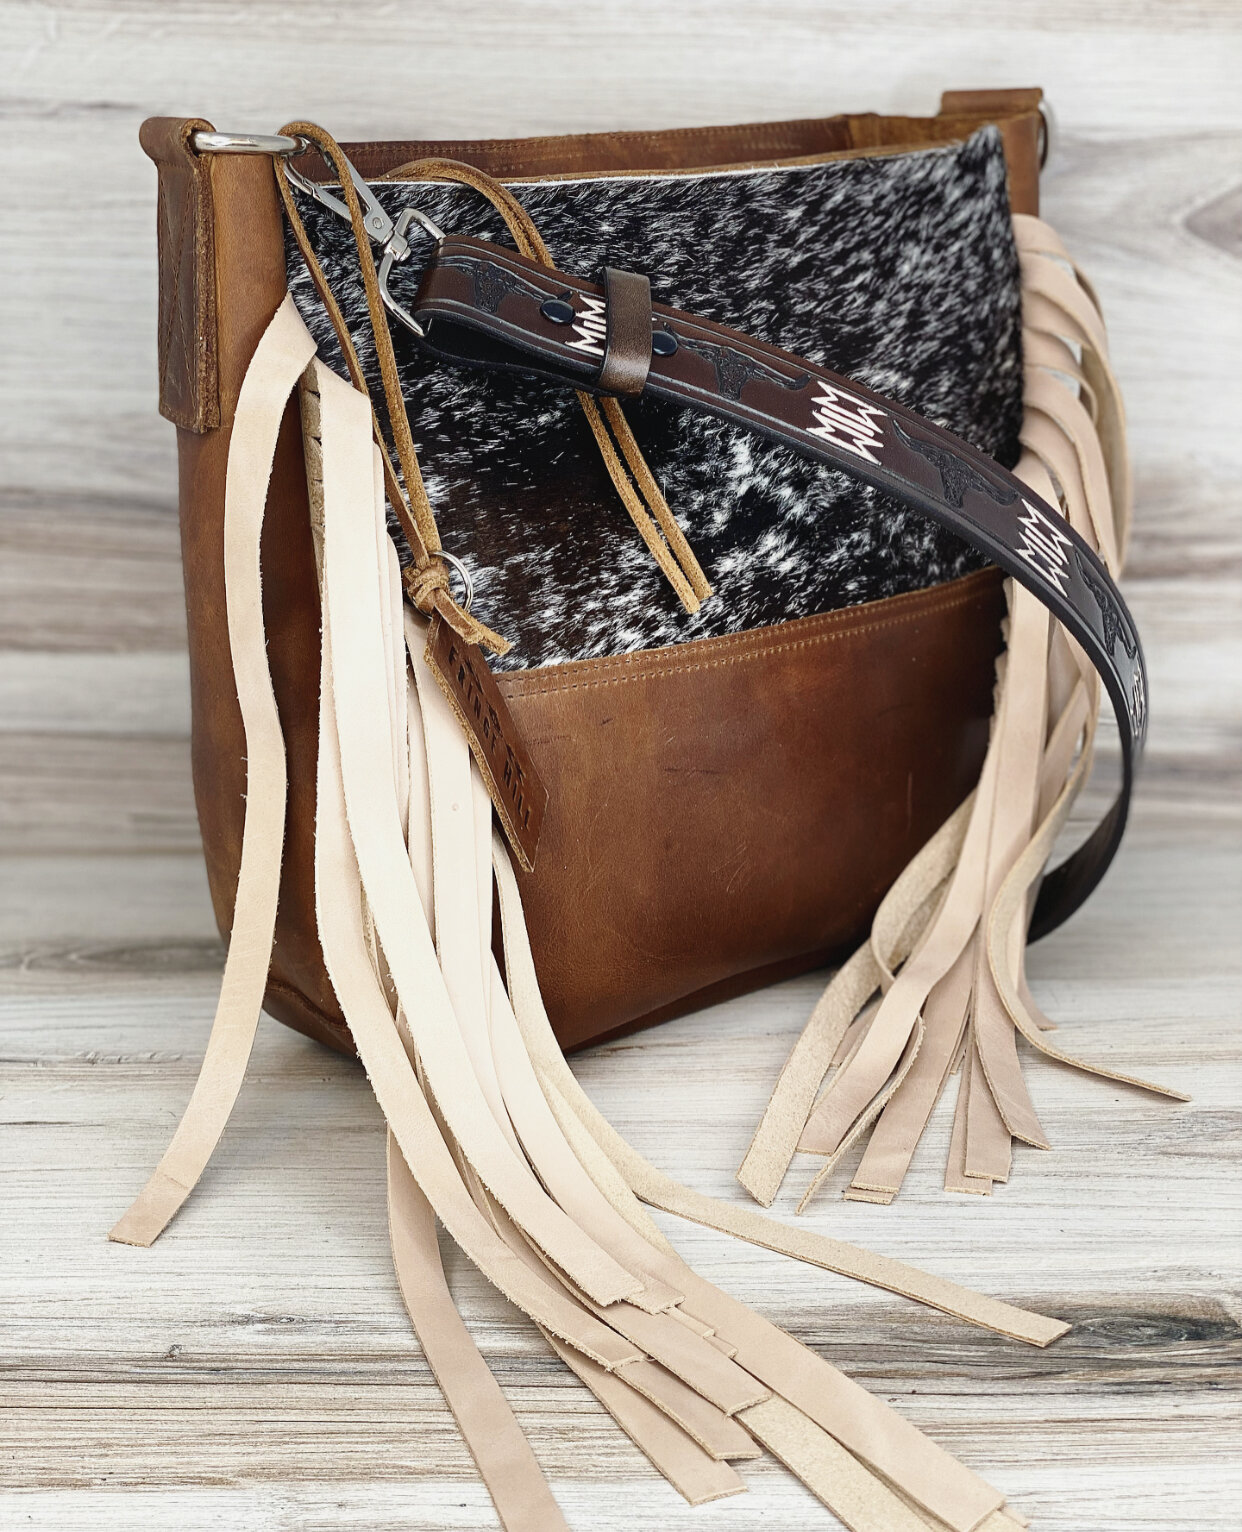 Amy' Tooling Leather Cowhide Bag Large With and Without Fringe